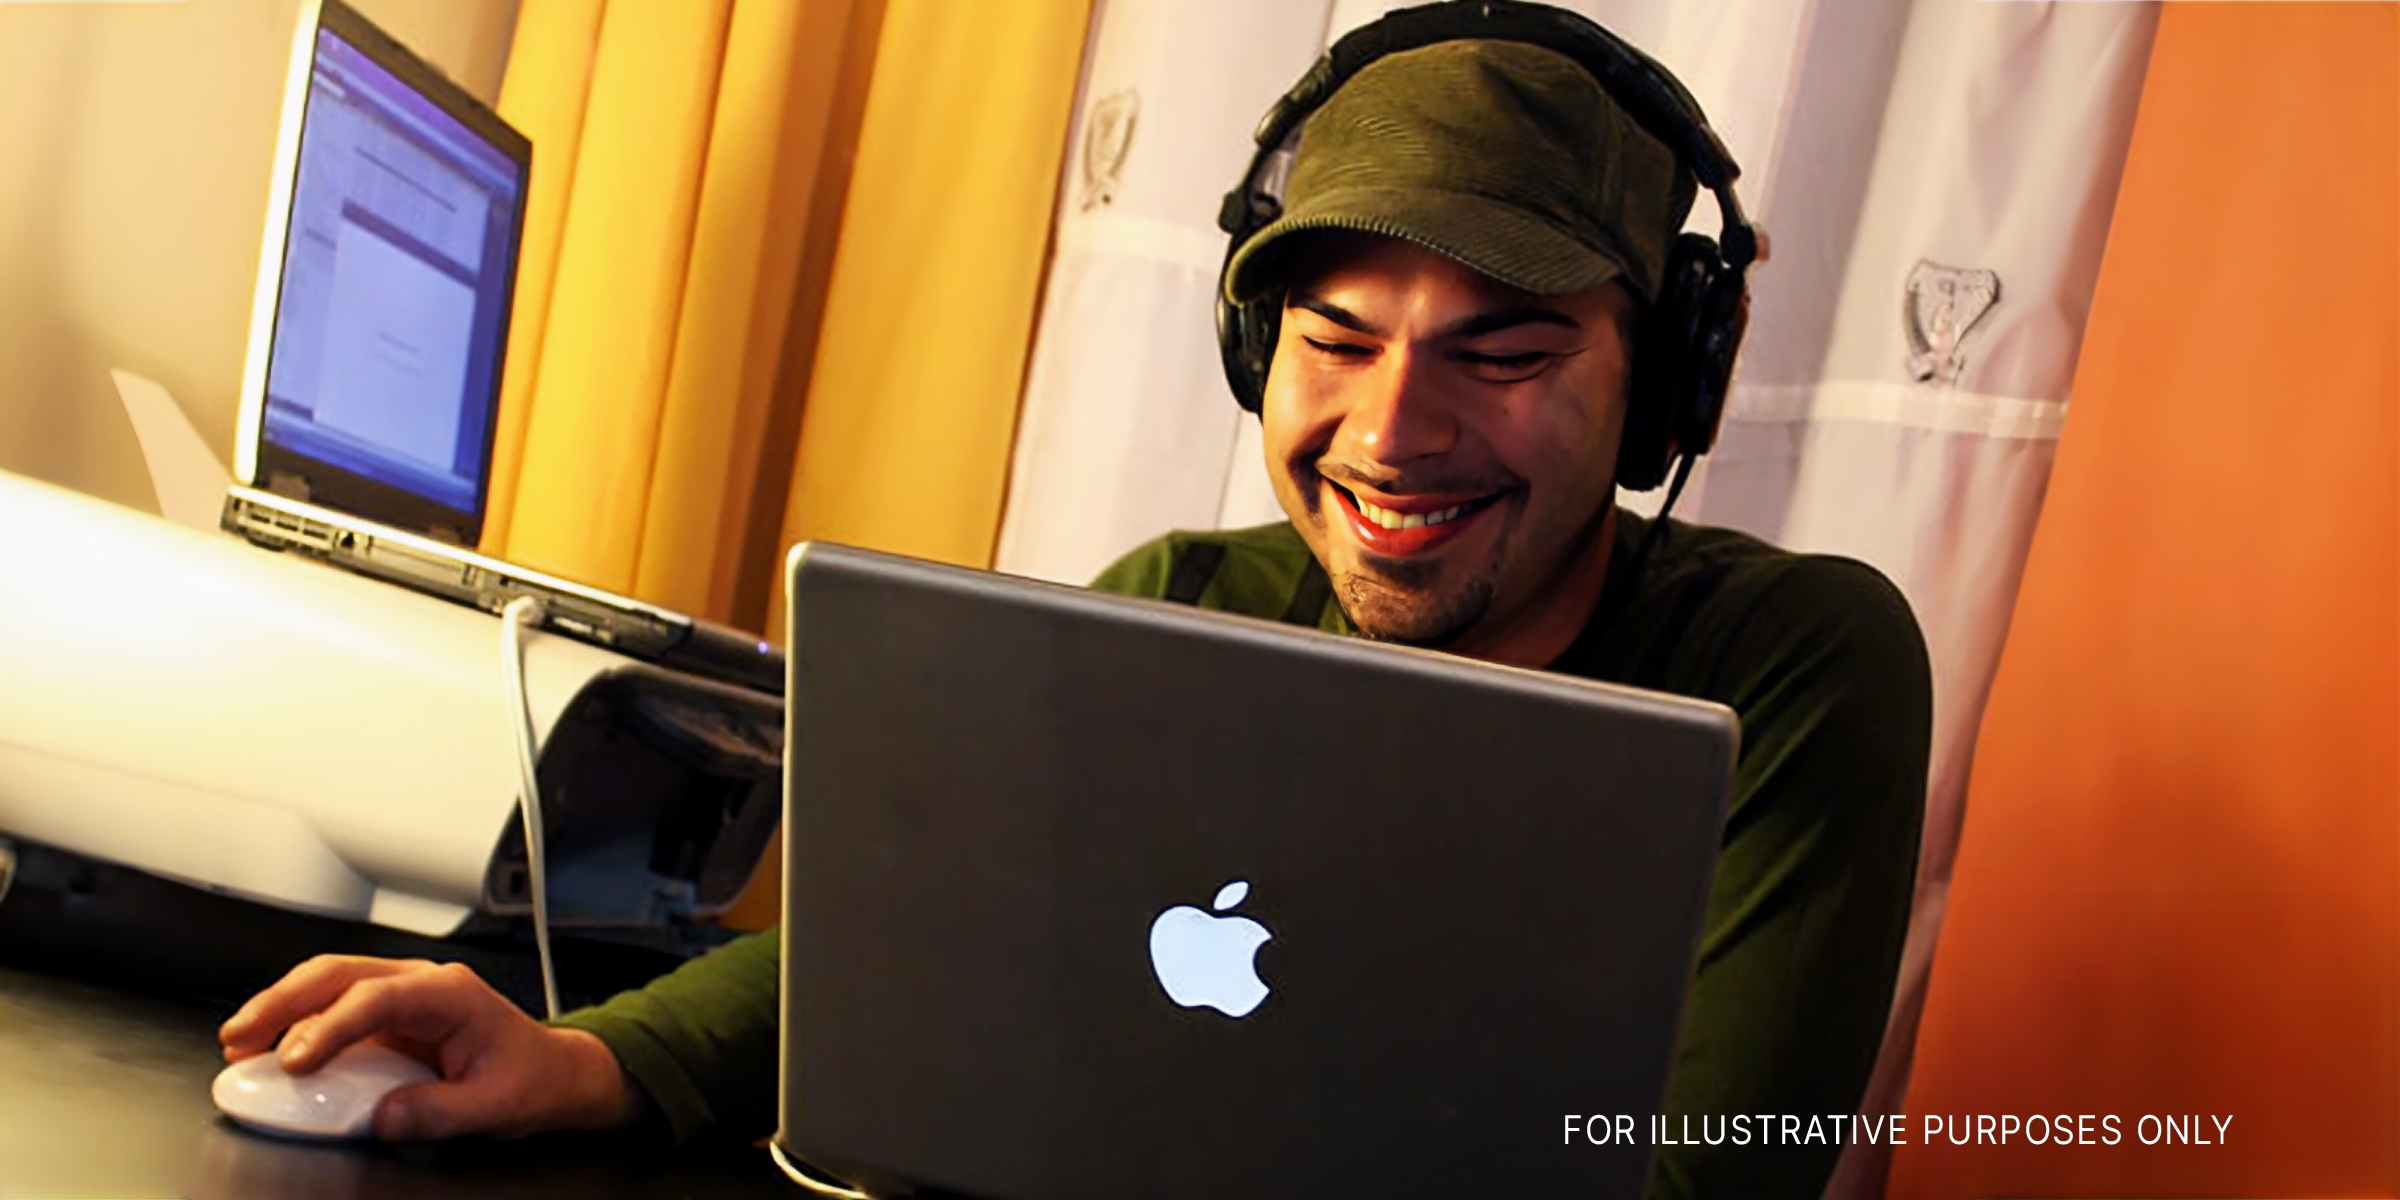 A man wearing headphones smiling at a laptop | Source: Flickr